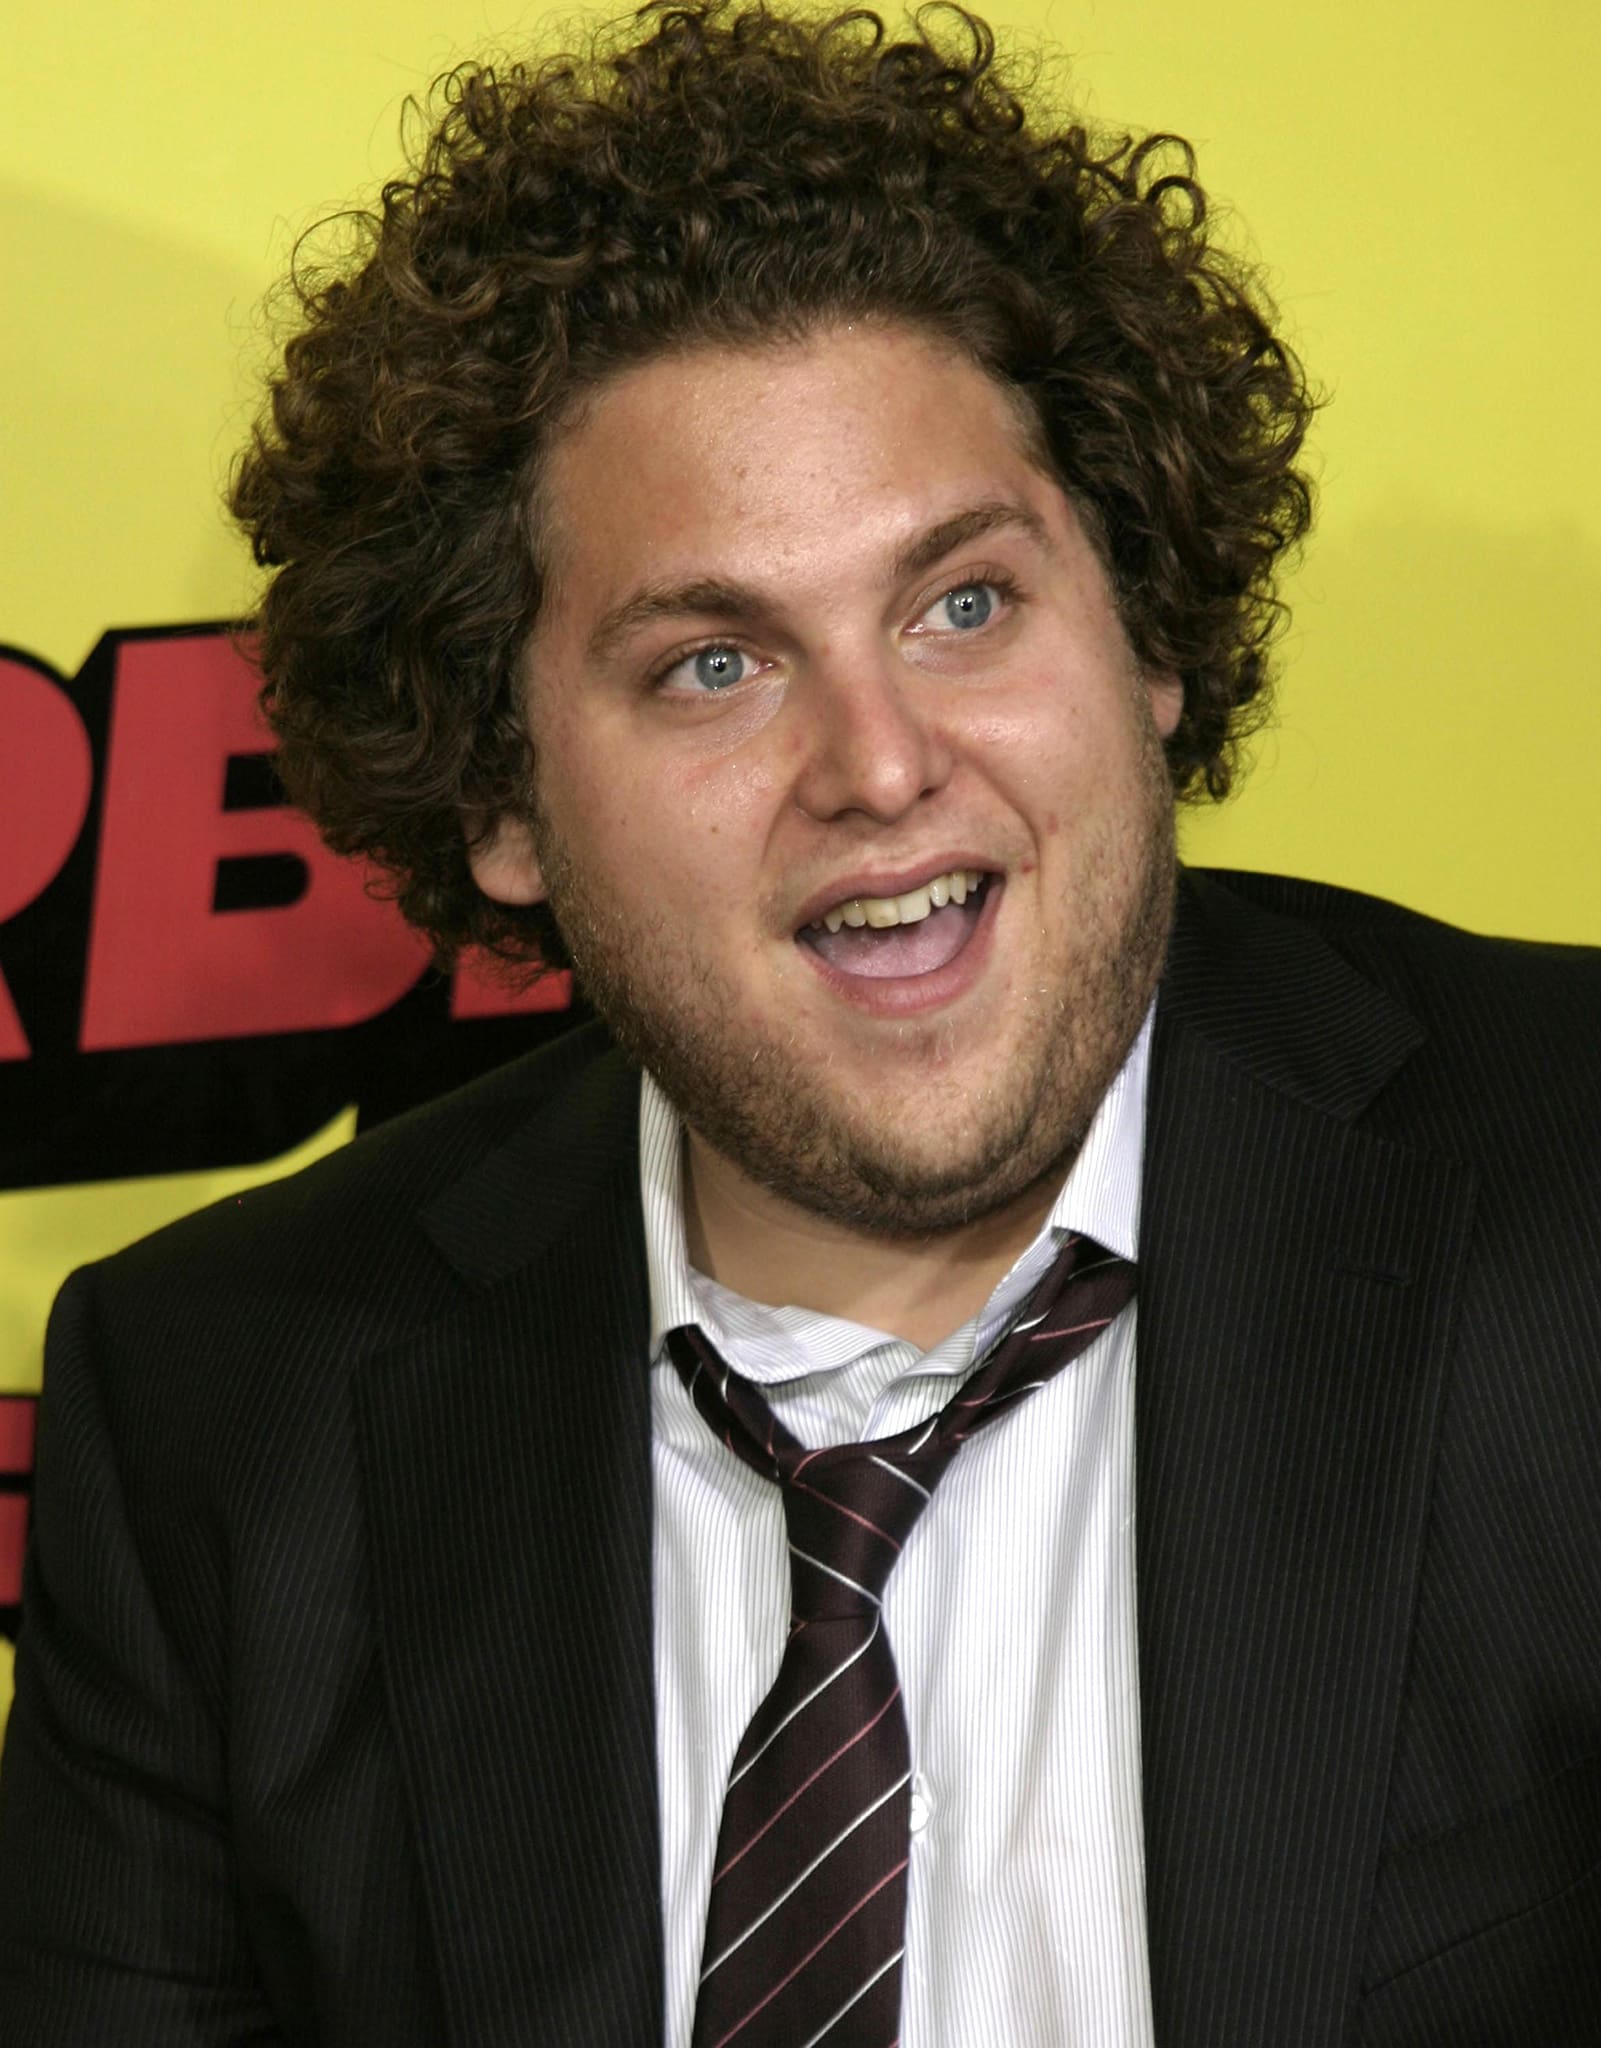 Jonah Hill shares how writing and directing Mid90s helped him better understand the trauma that he experienced because of the way he looked